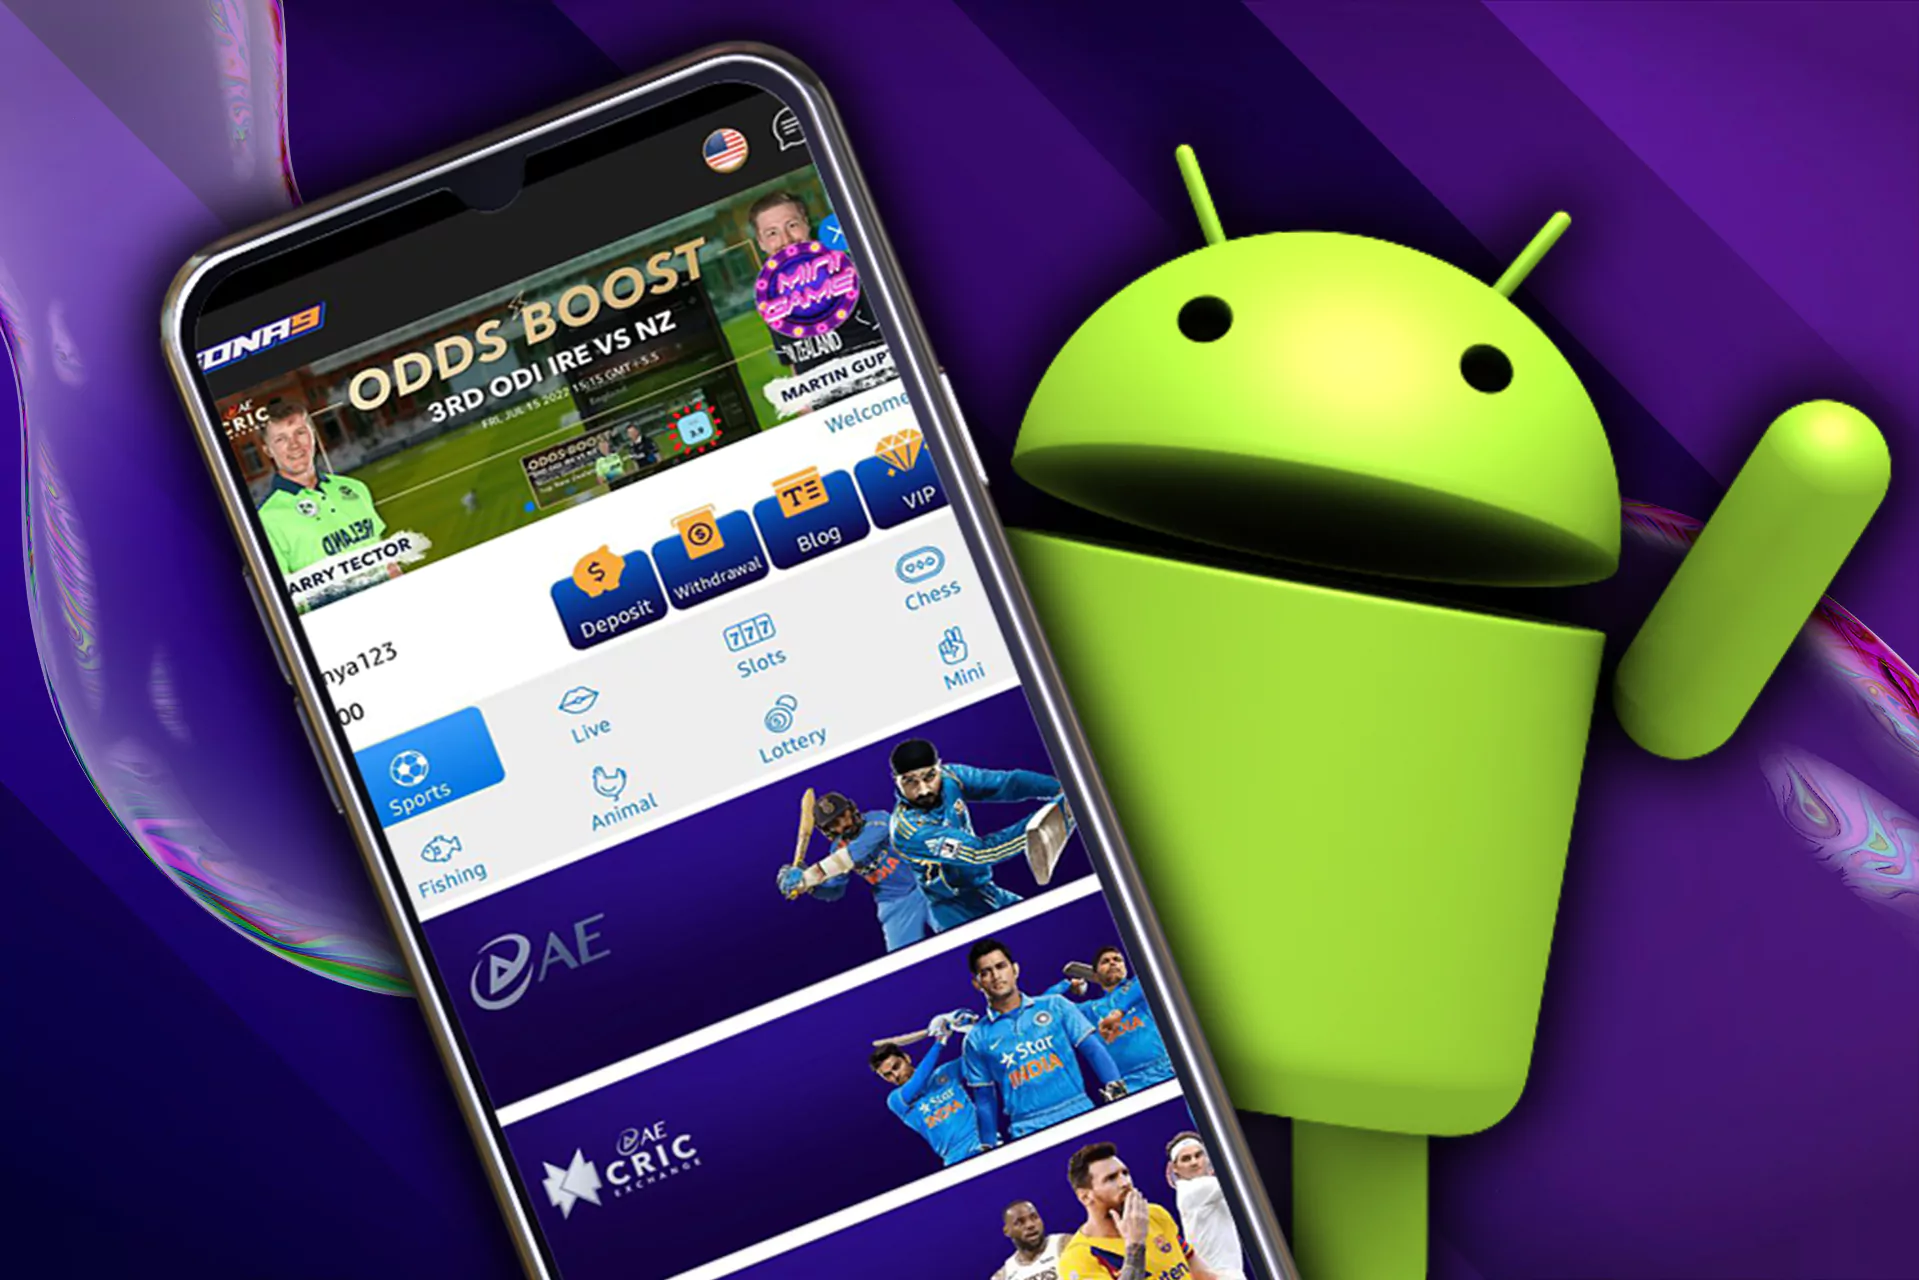 Download the Sona9 apk for Android and bet whenever you want.